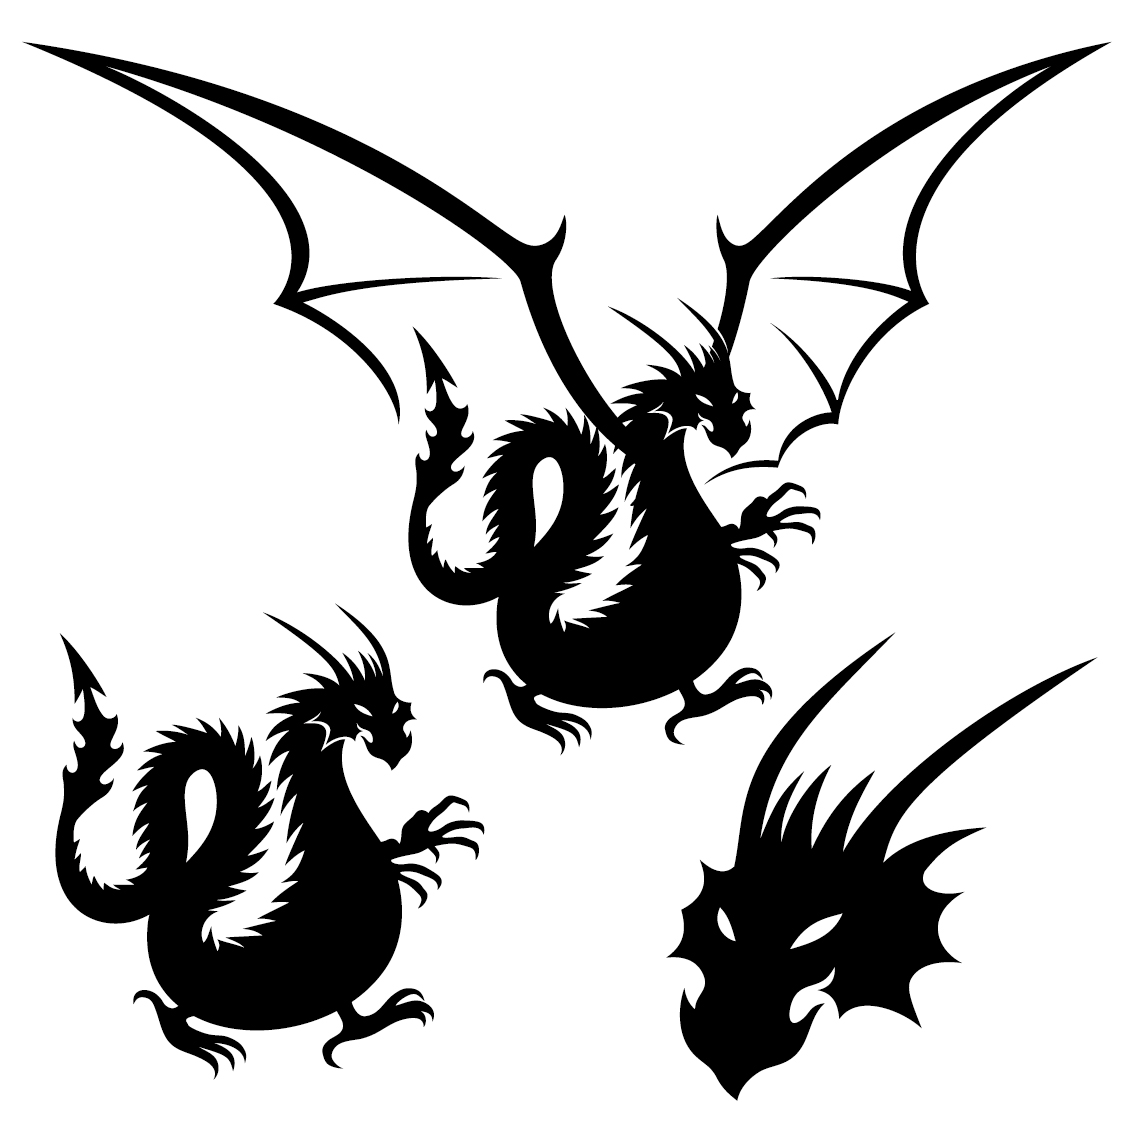 Dragon tattoo element vector material free download